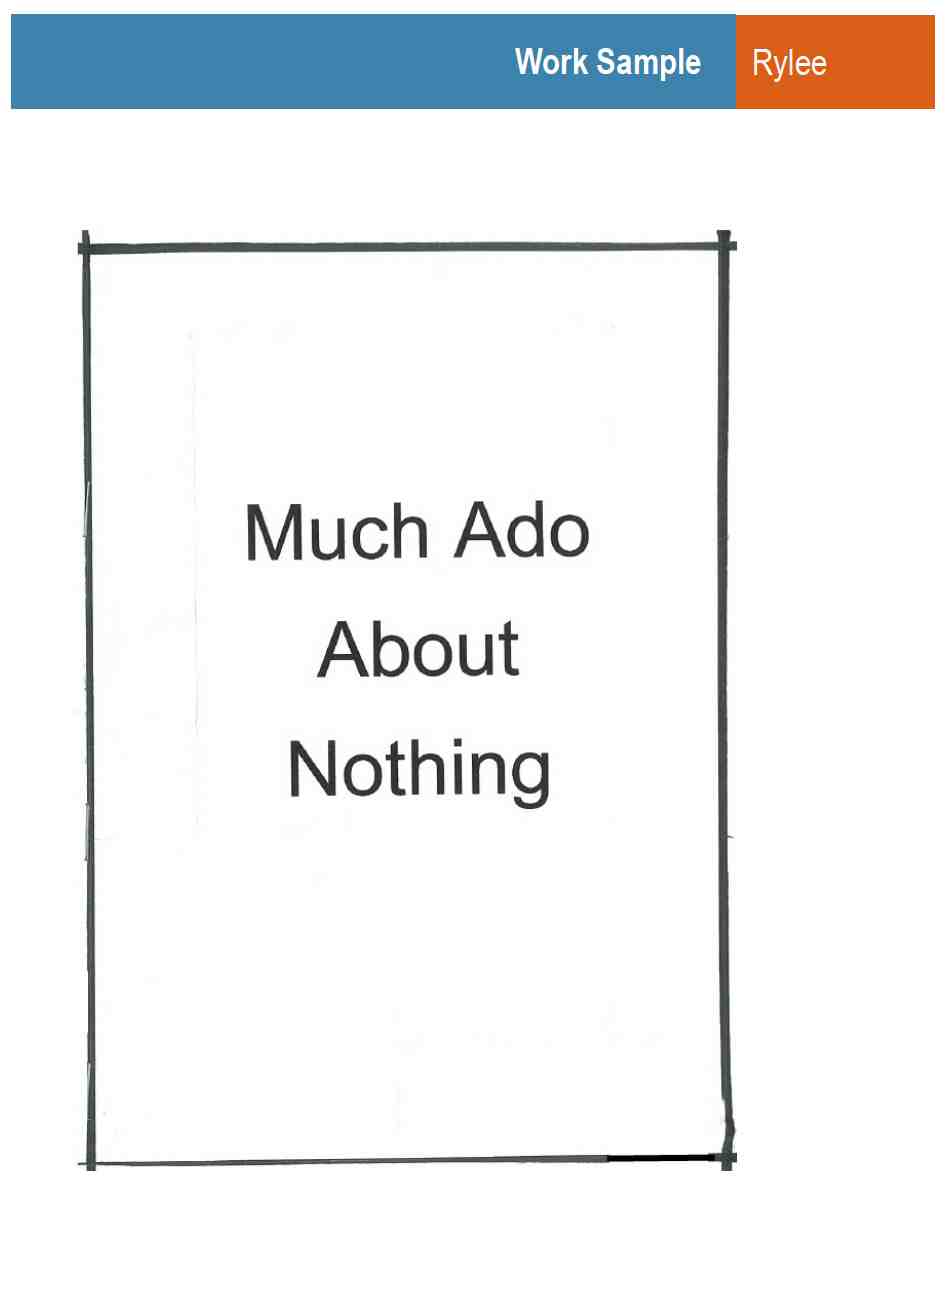 Shakespeare representation task: Much Ado About Nothing - Rylee